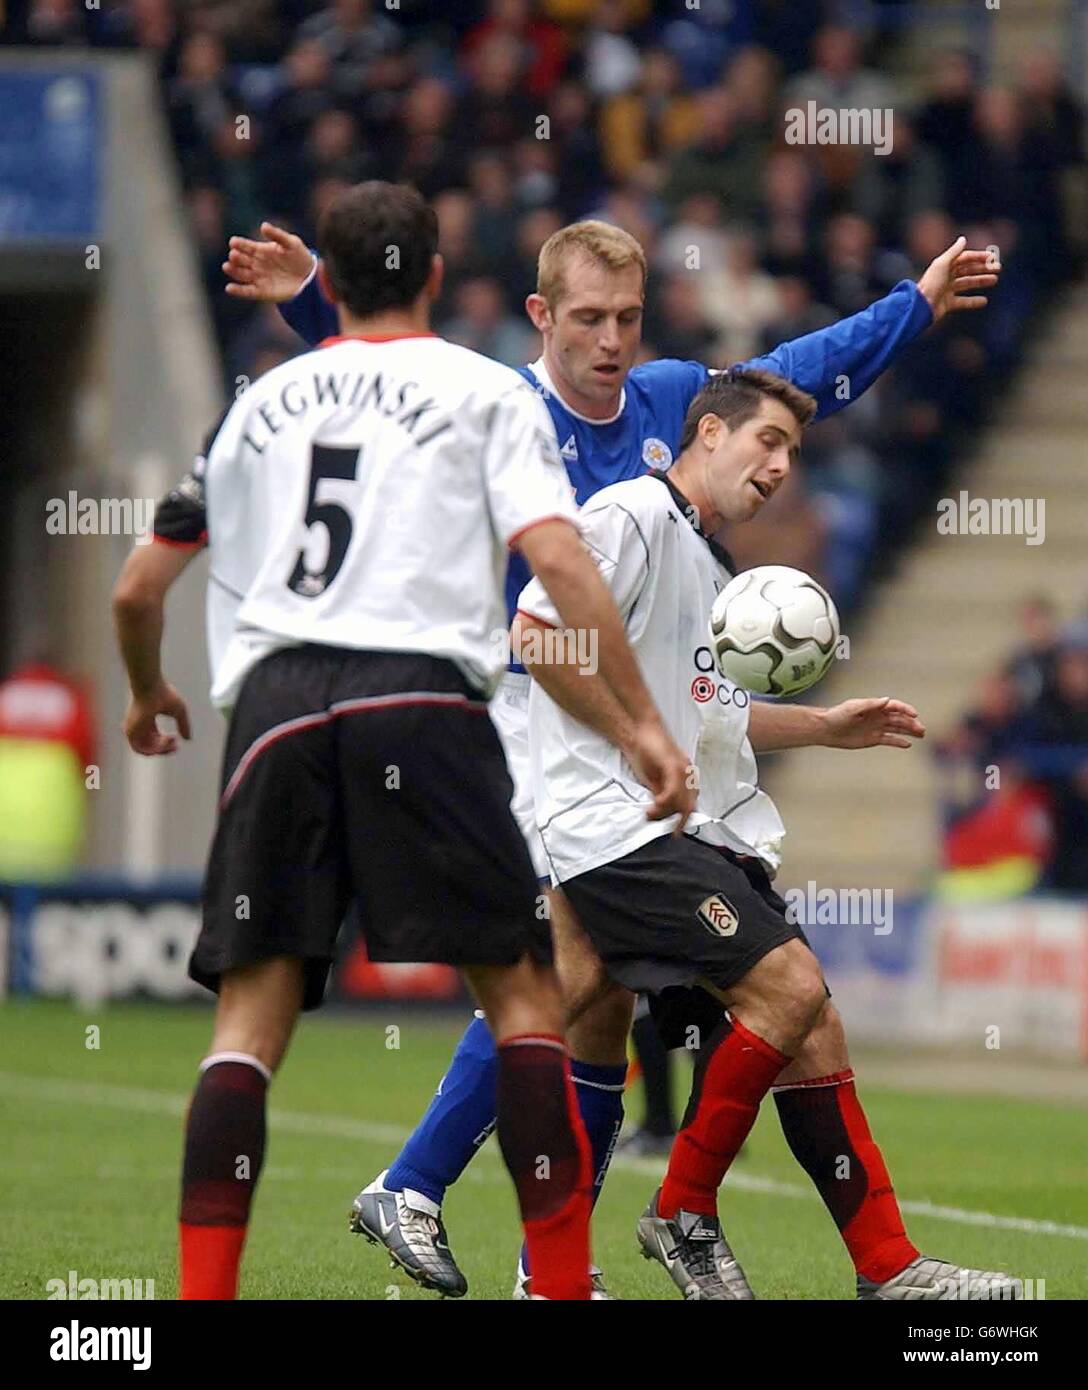 Fulham's Carlos Bocanegra keeps off Leicester City's James Scowcroft during the Barclaycard Premiership match at the Walker's Stadium, Leicester. Stock Photo